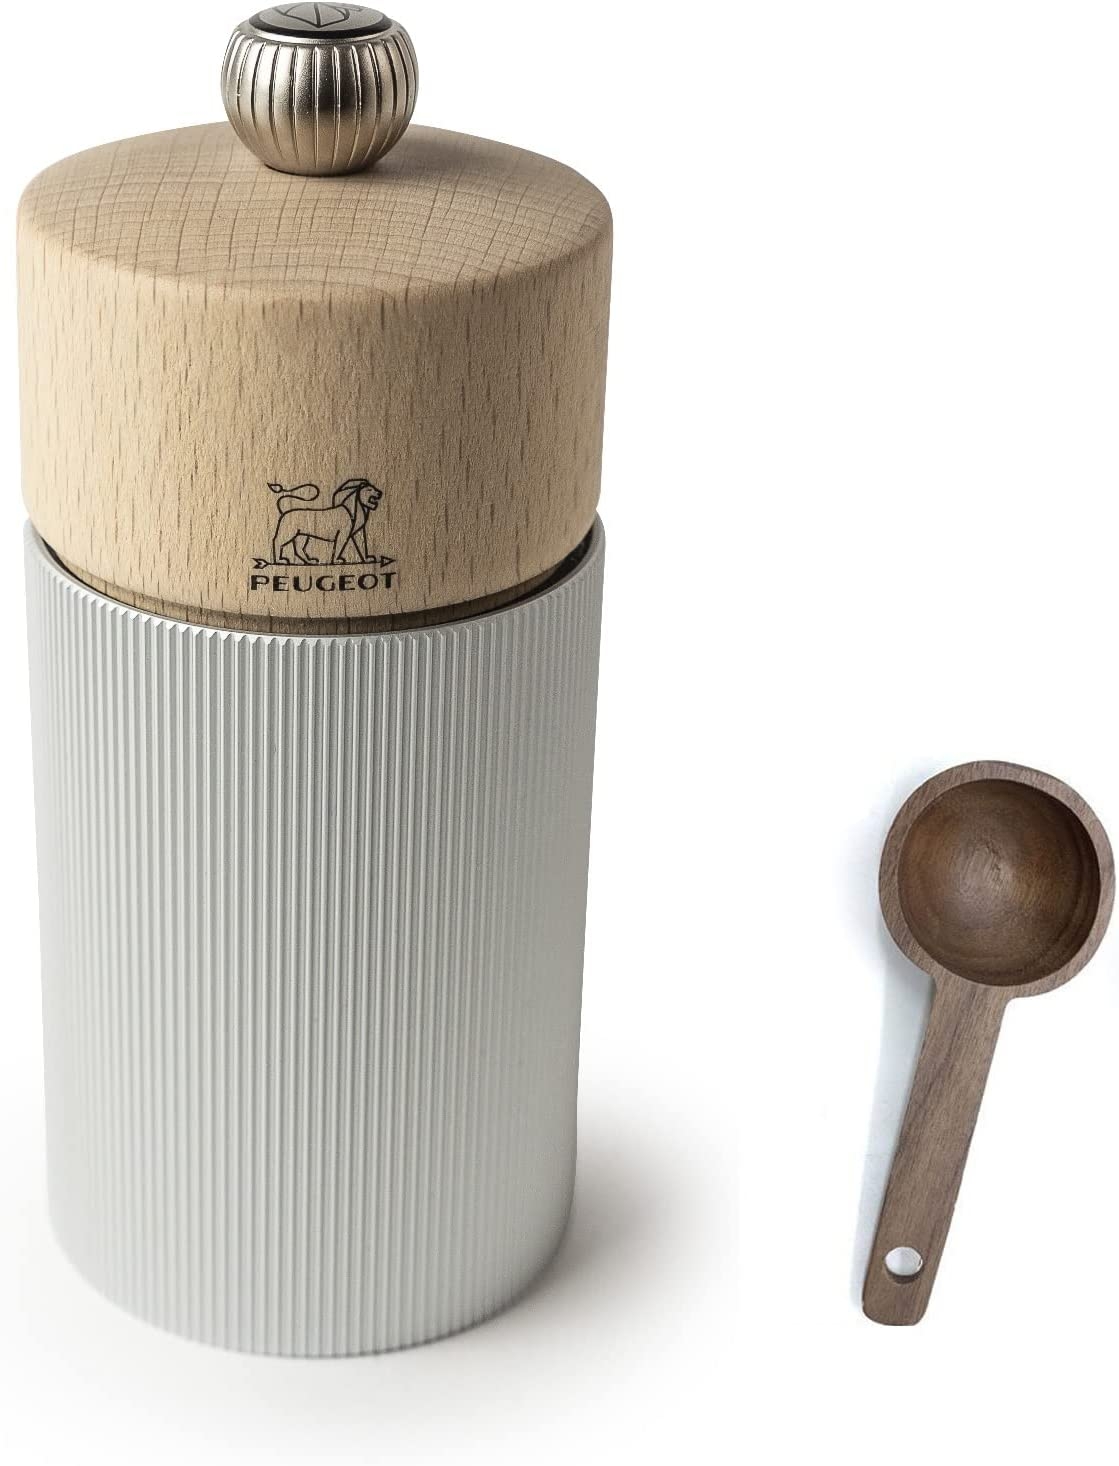 Peugeot Line Manual Salt Mill, alu, 12 cm – 4.75″ Natural Wood – With Wooden Spice Scoop Import To Shop ×Product customization